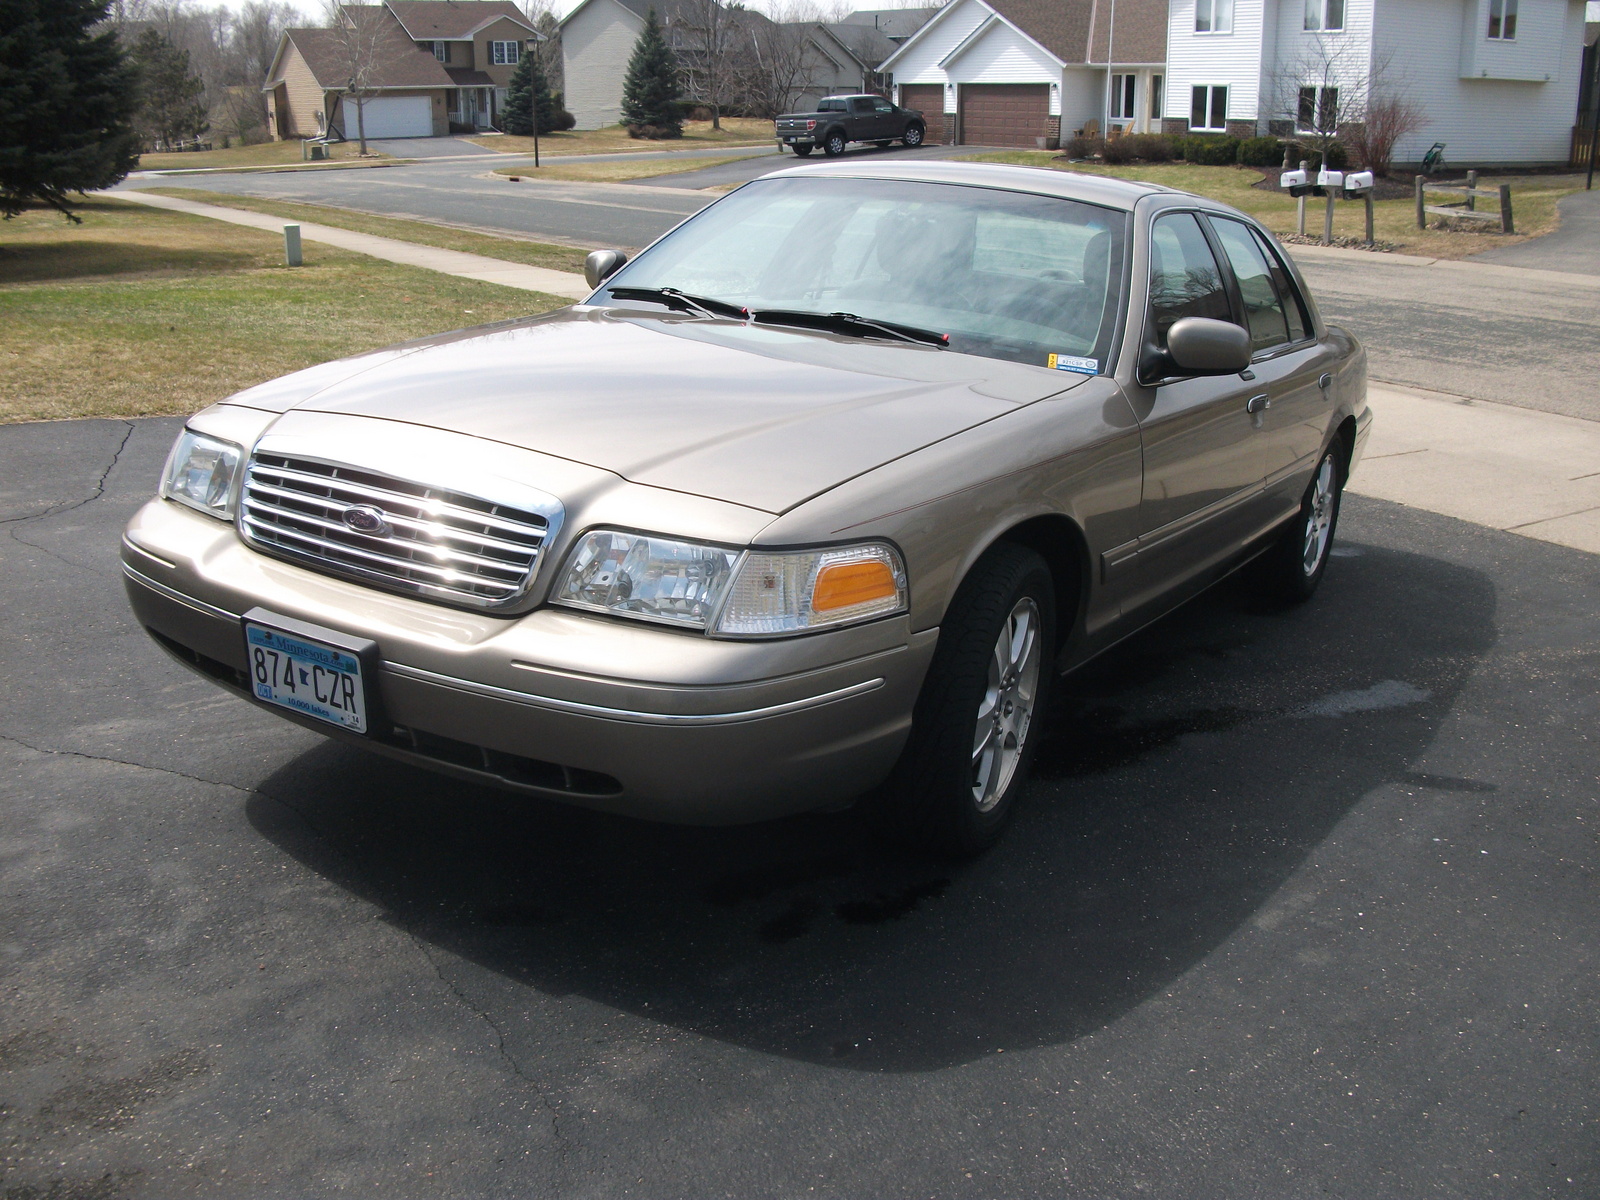 2003 Ford crown victoria specs #1